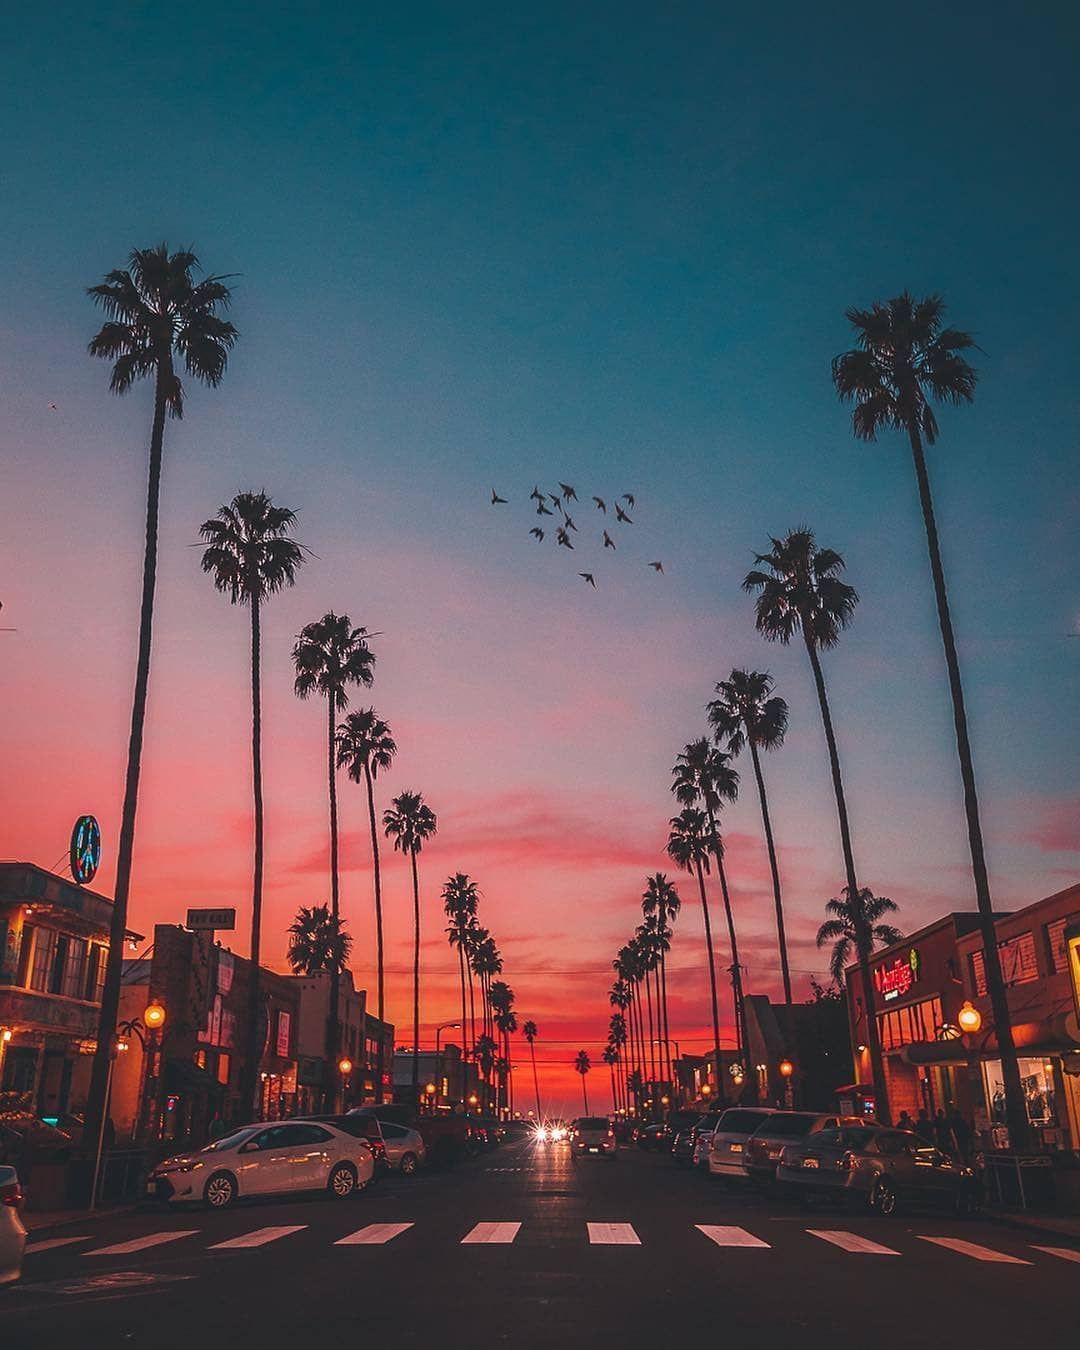 California ❤️❤️❤️ on Instagram: “Photo by: Follow - > Rate it! < Use our tag to be. Sky aesthetic, Sunset picture, Sunset wallpaper